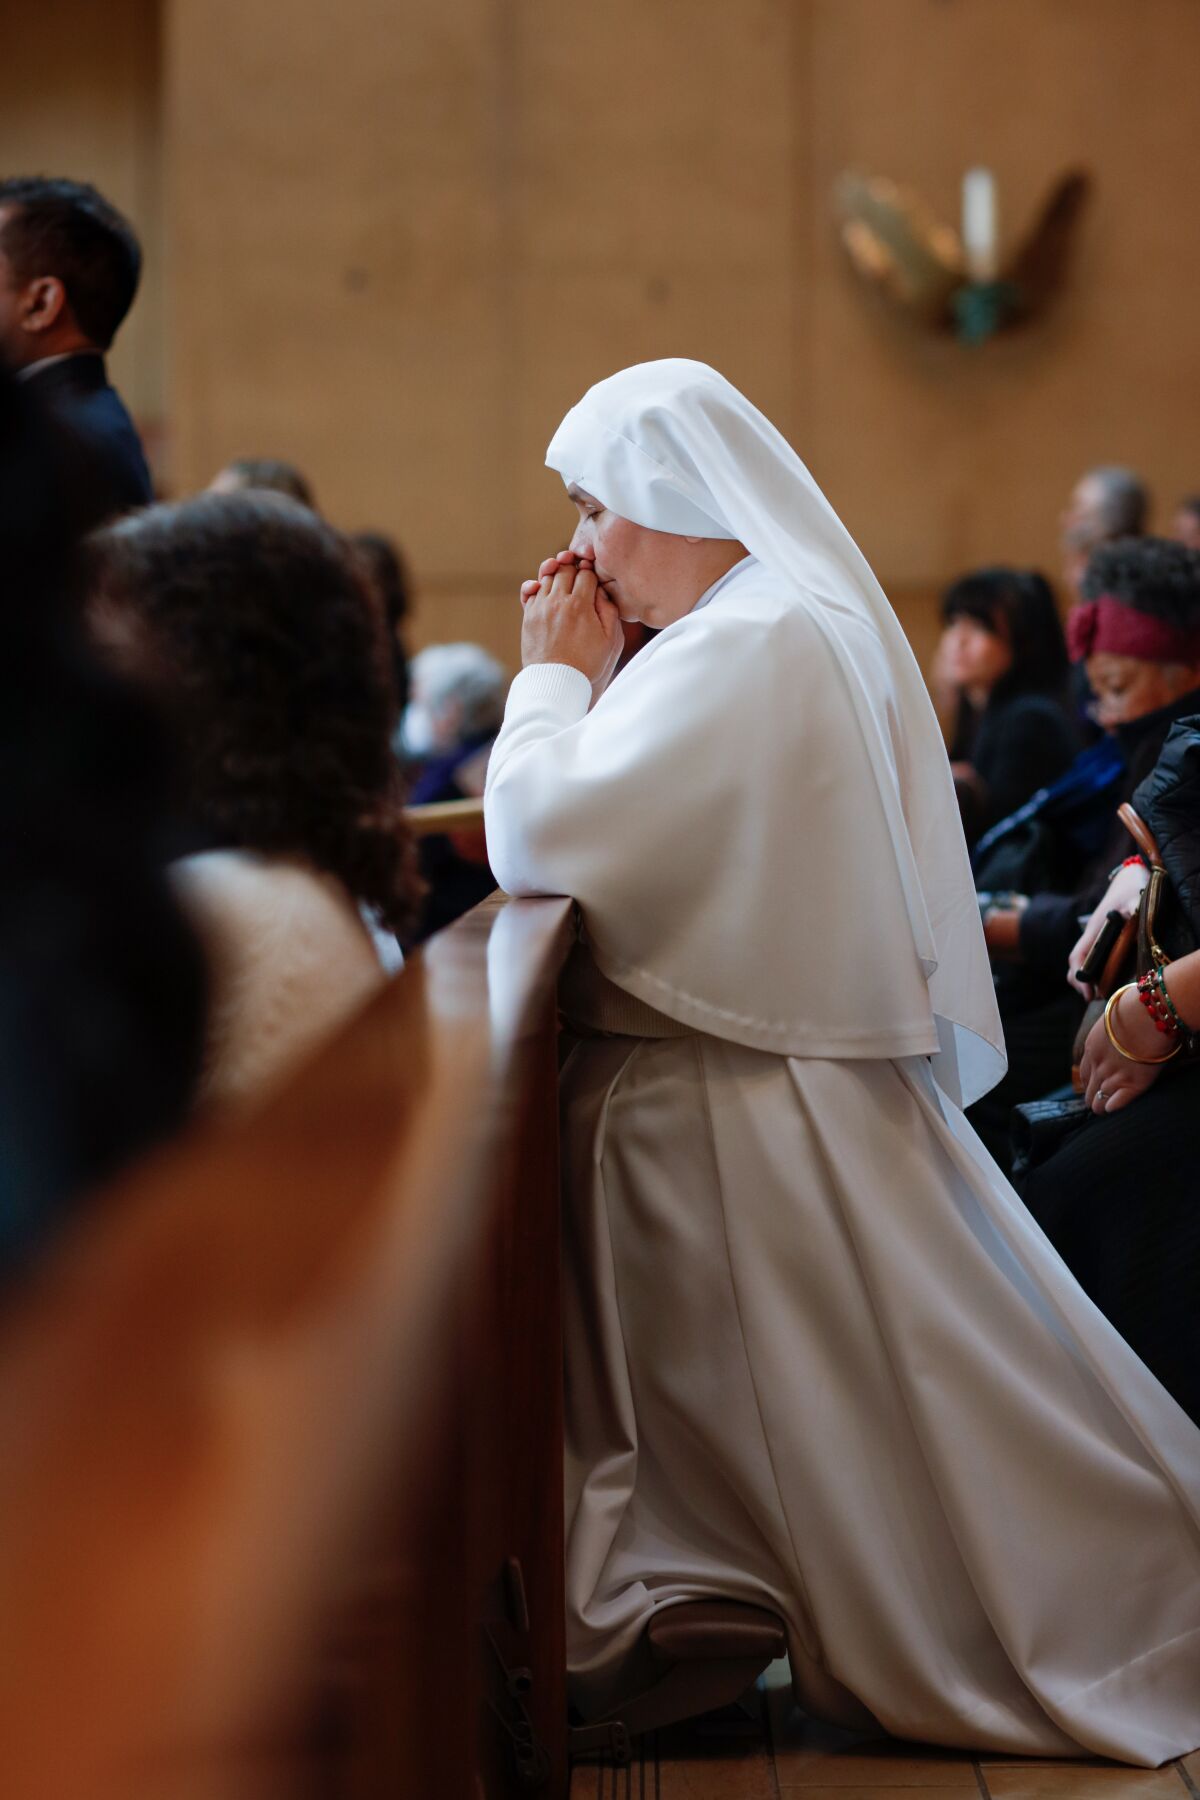 A nun in a white habit prays while kneeling in a church.